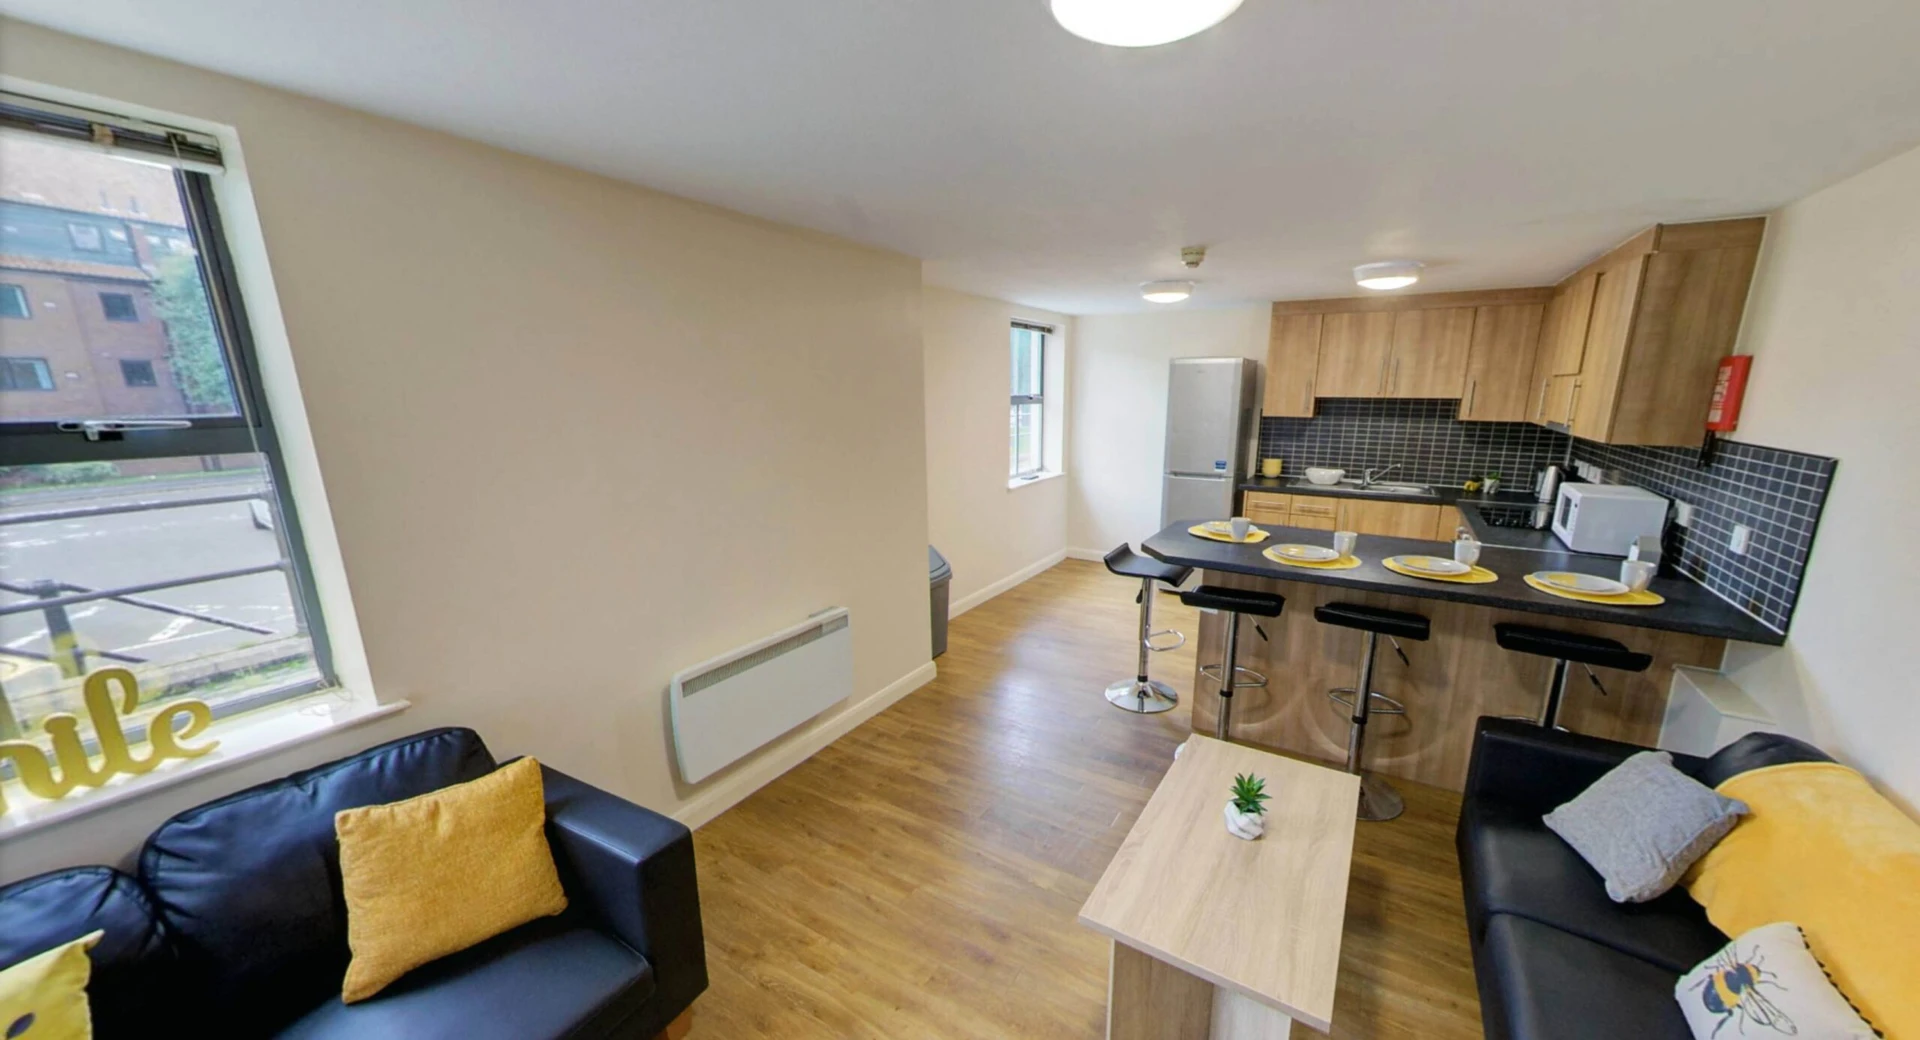 Renting rooms by the month in Bristol